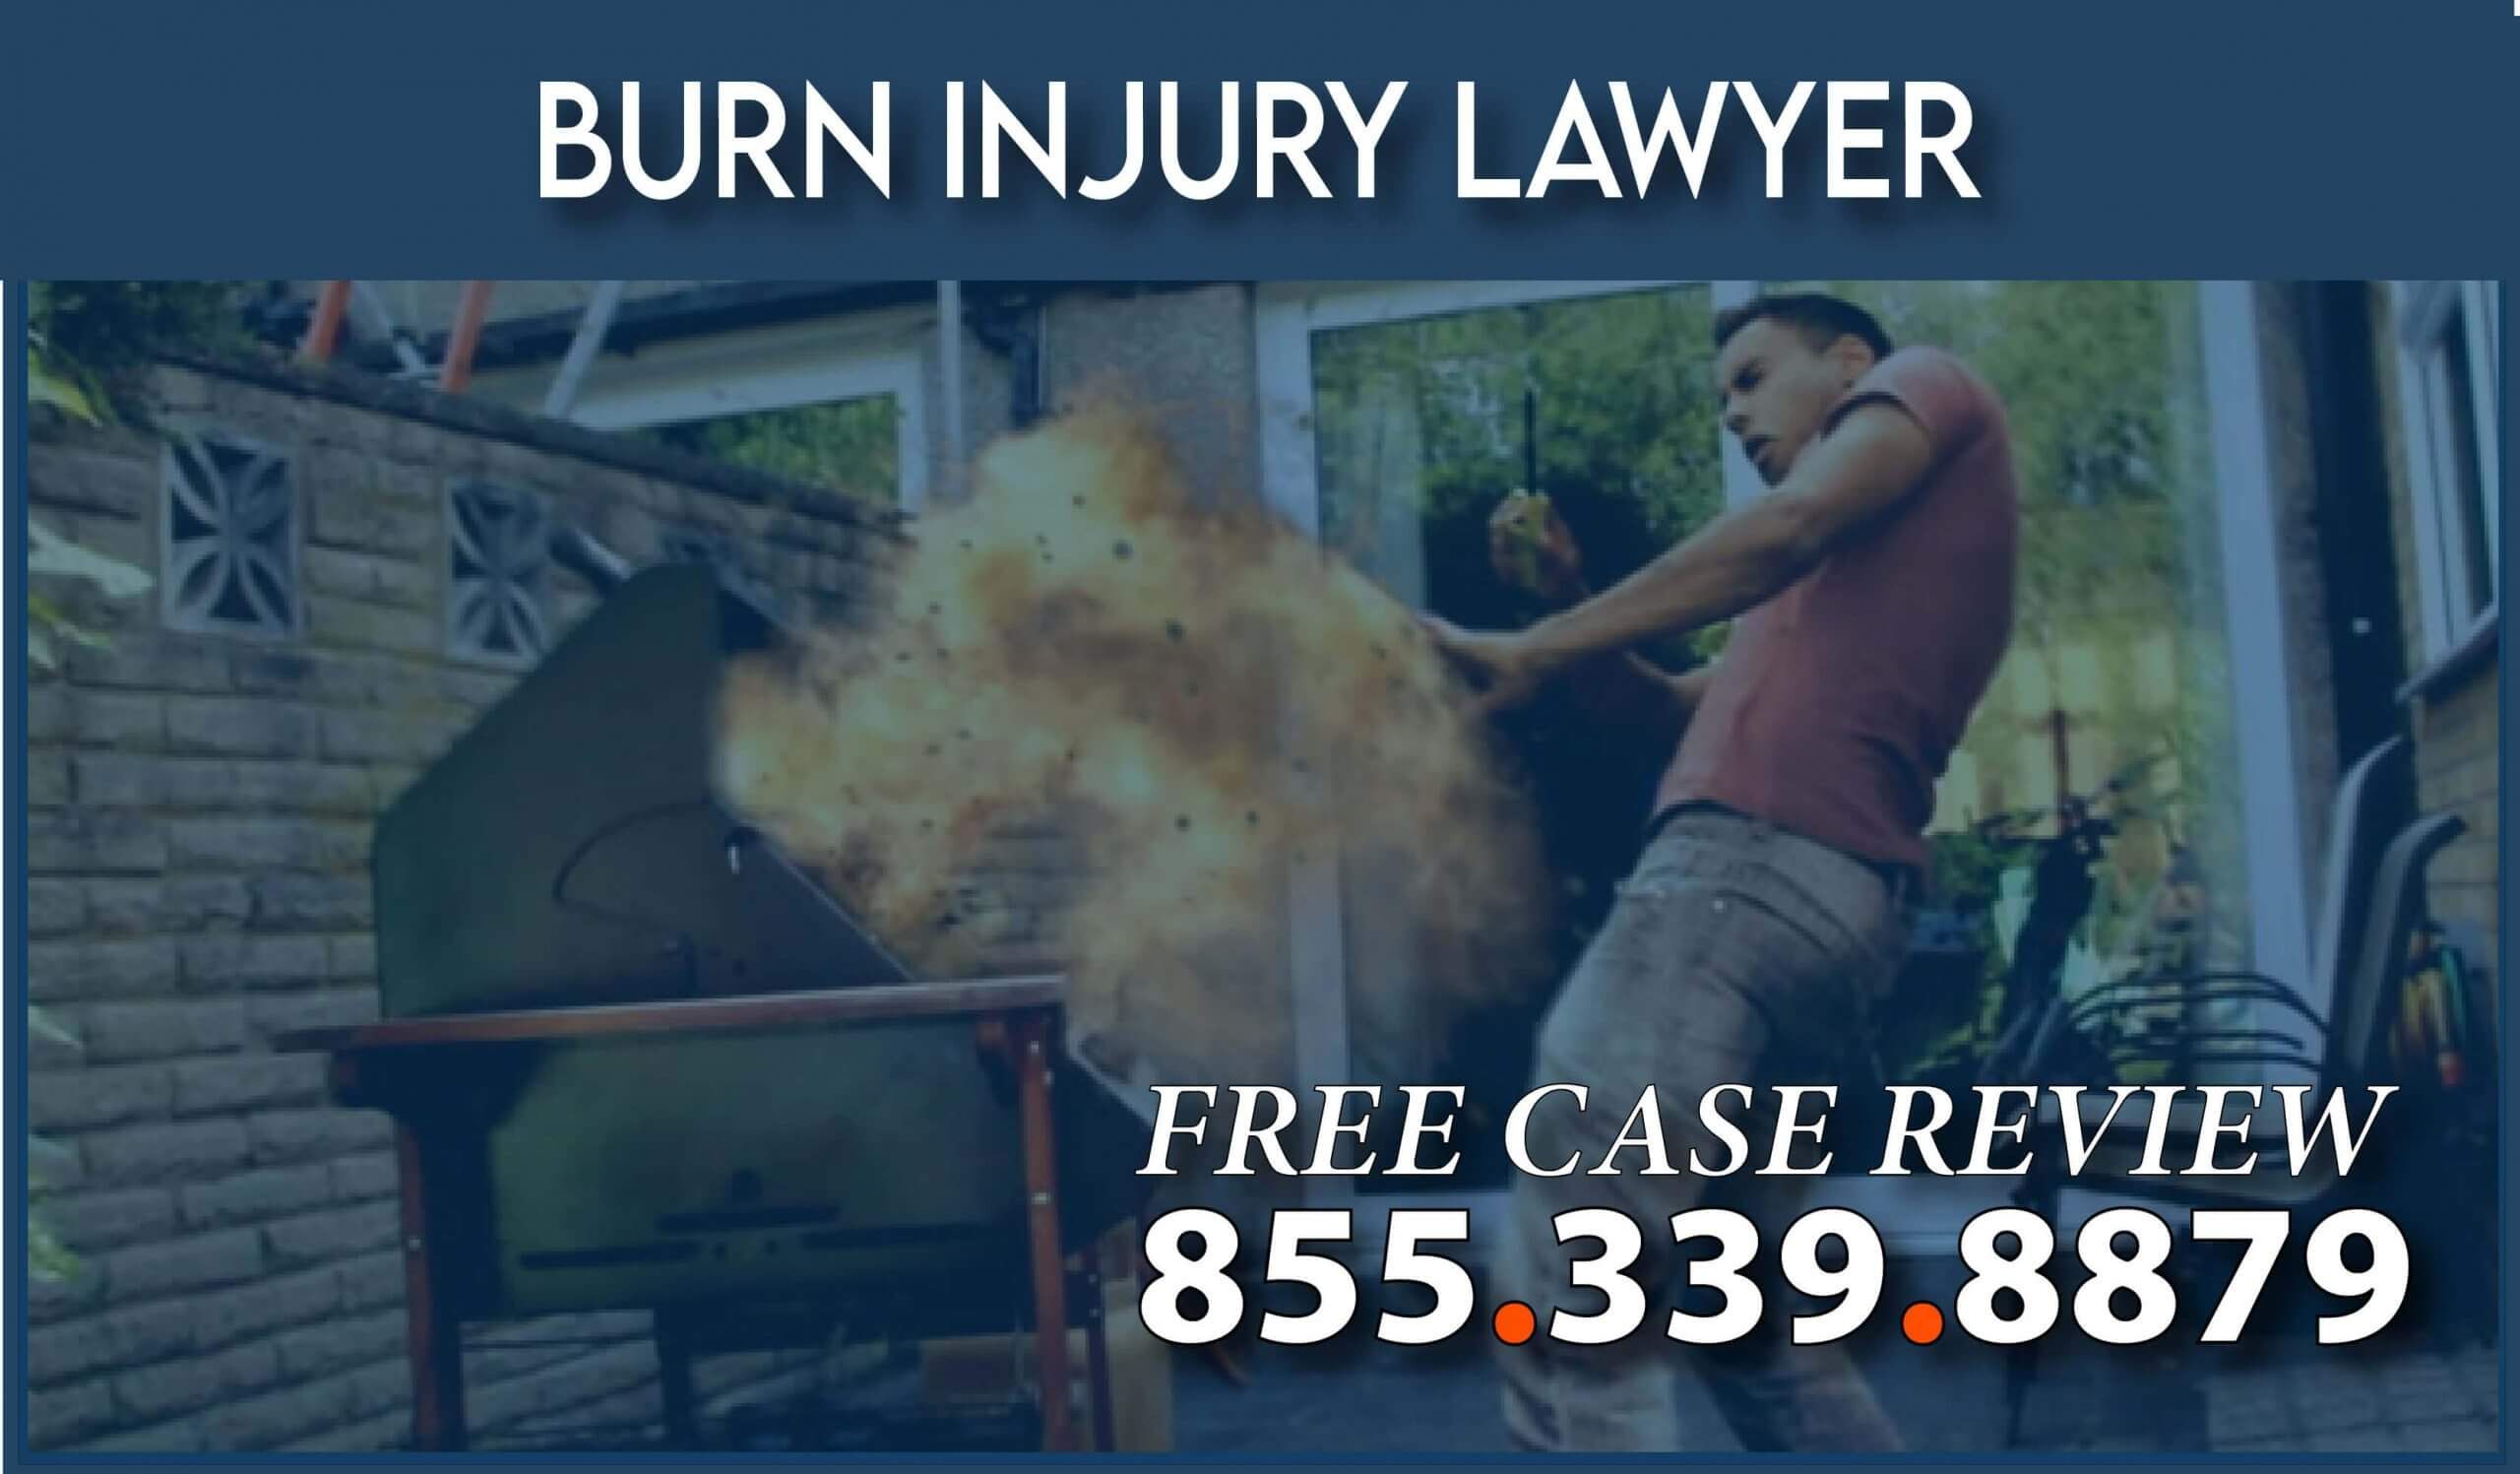 barbecue grill defect explosion burn injury lawyer compensation sue